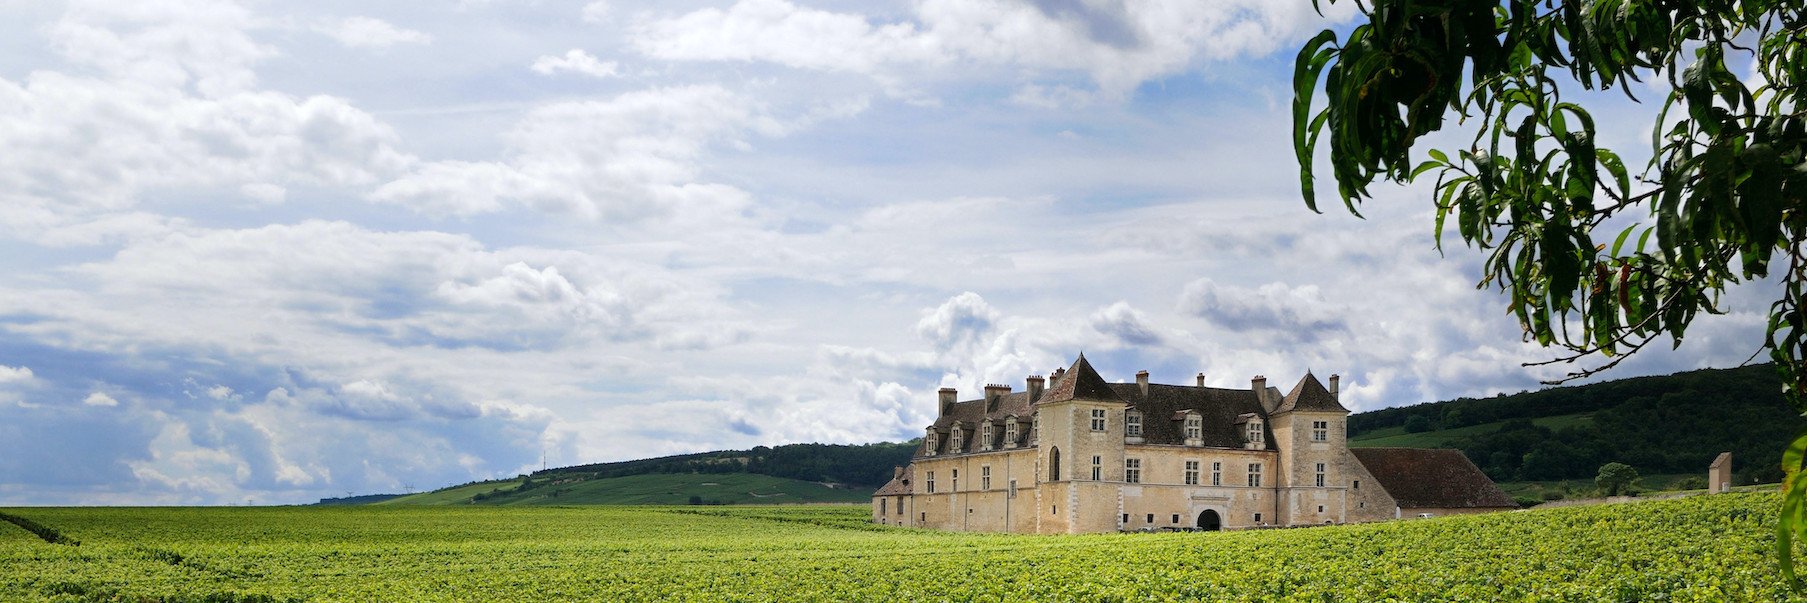 One of the most famous&nbsp;grand cru&nbsp;vineyards, Clos de Vougeot in Burgundy, was planted by Cistercian monks.&nbsp;